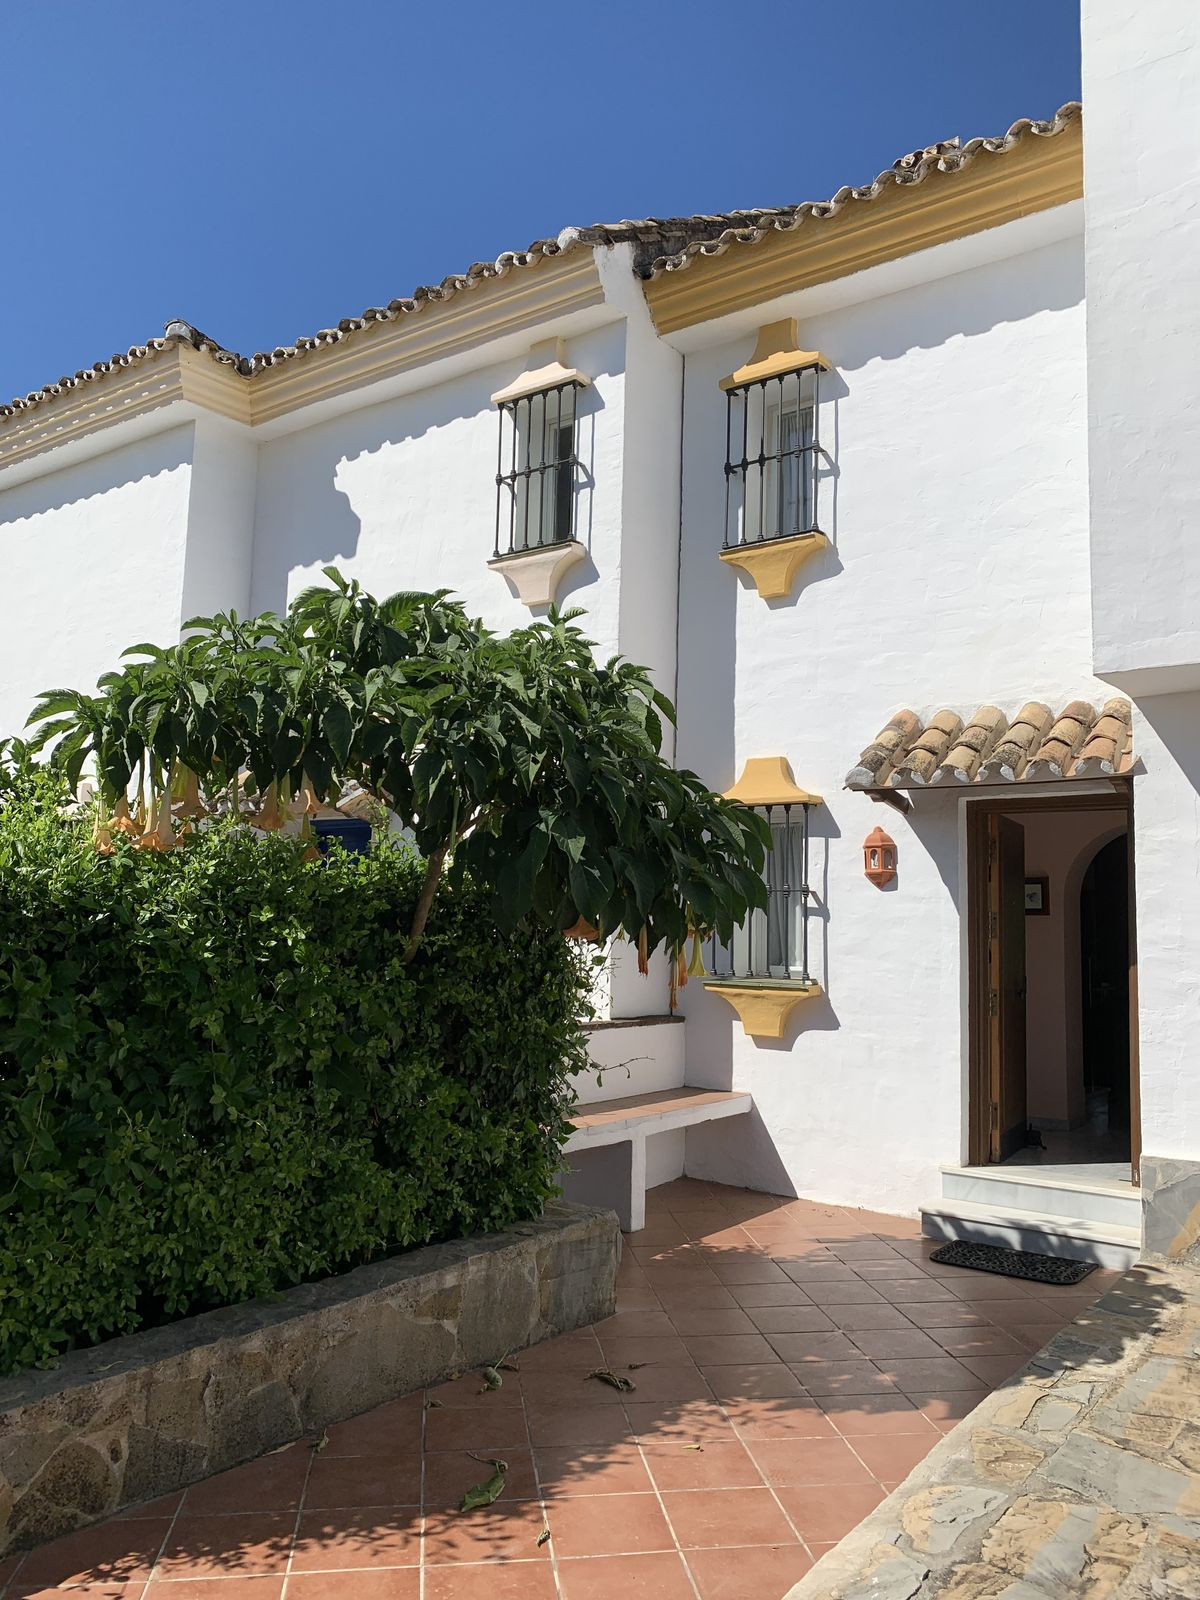 Semi-Detached House for sale in Estepona R4116304